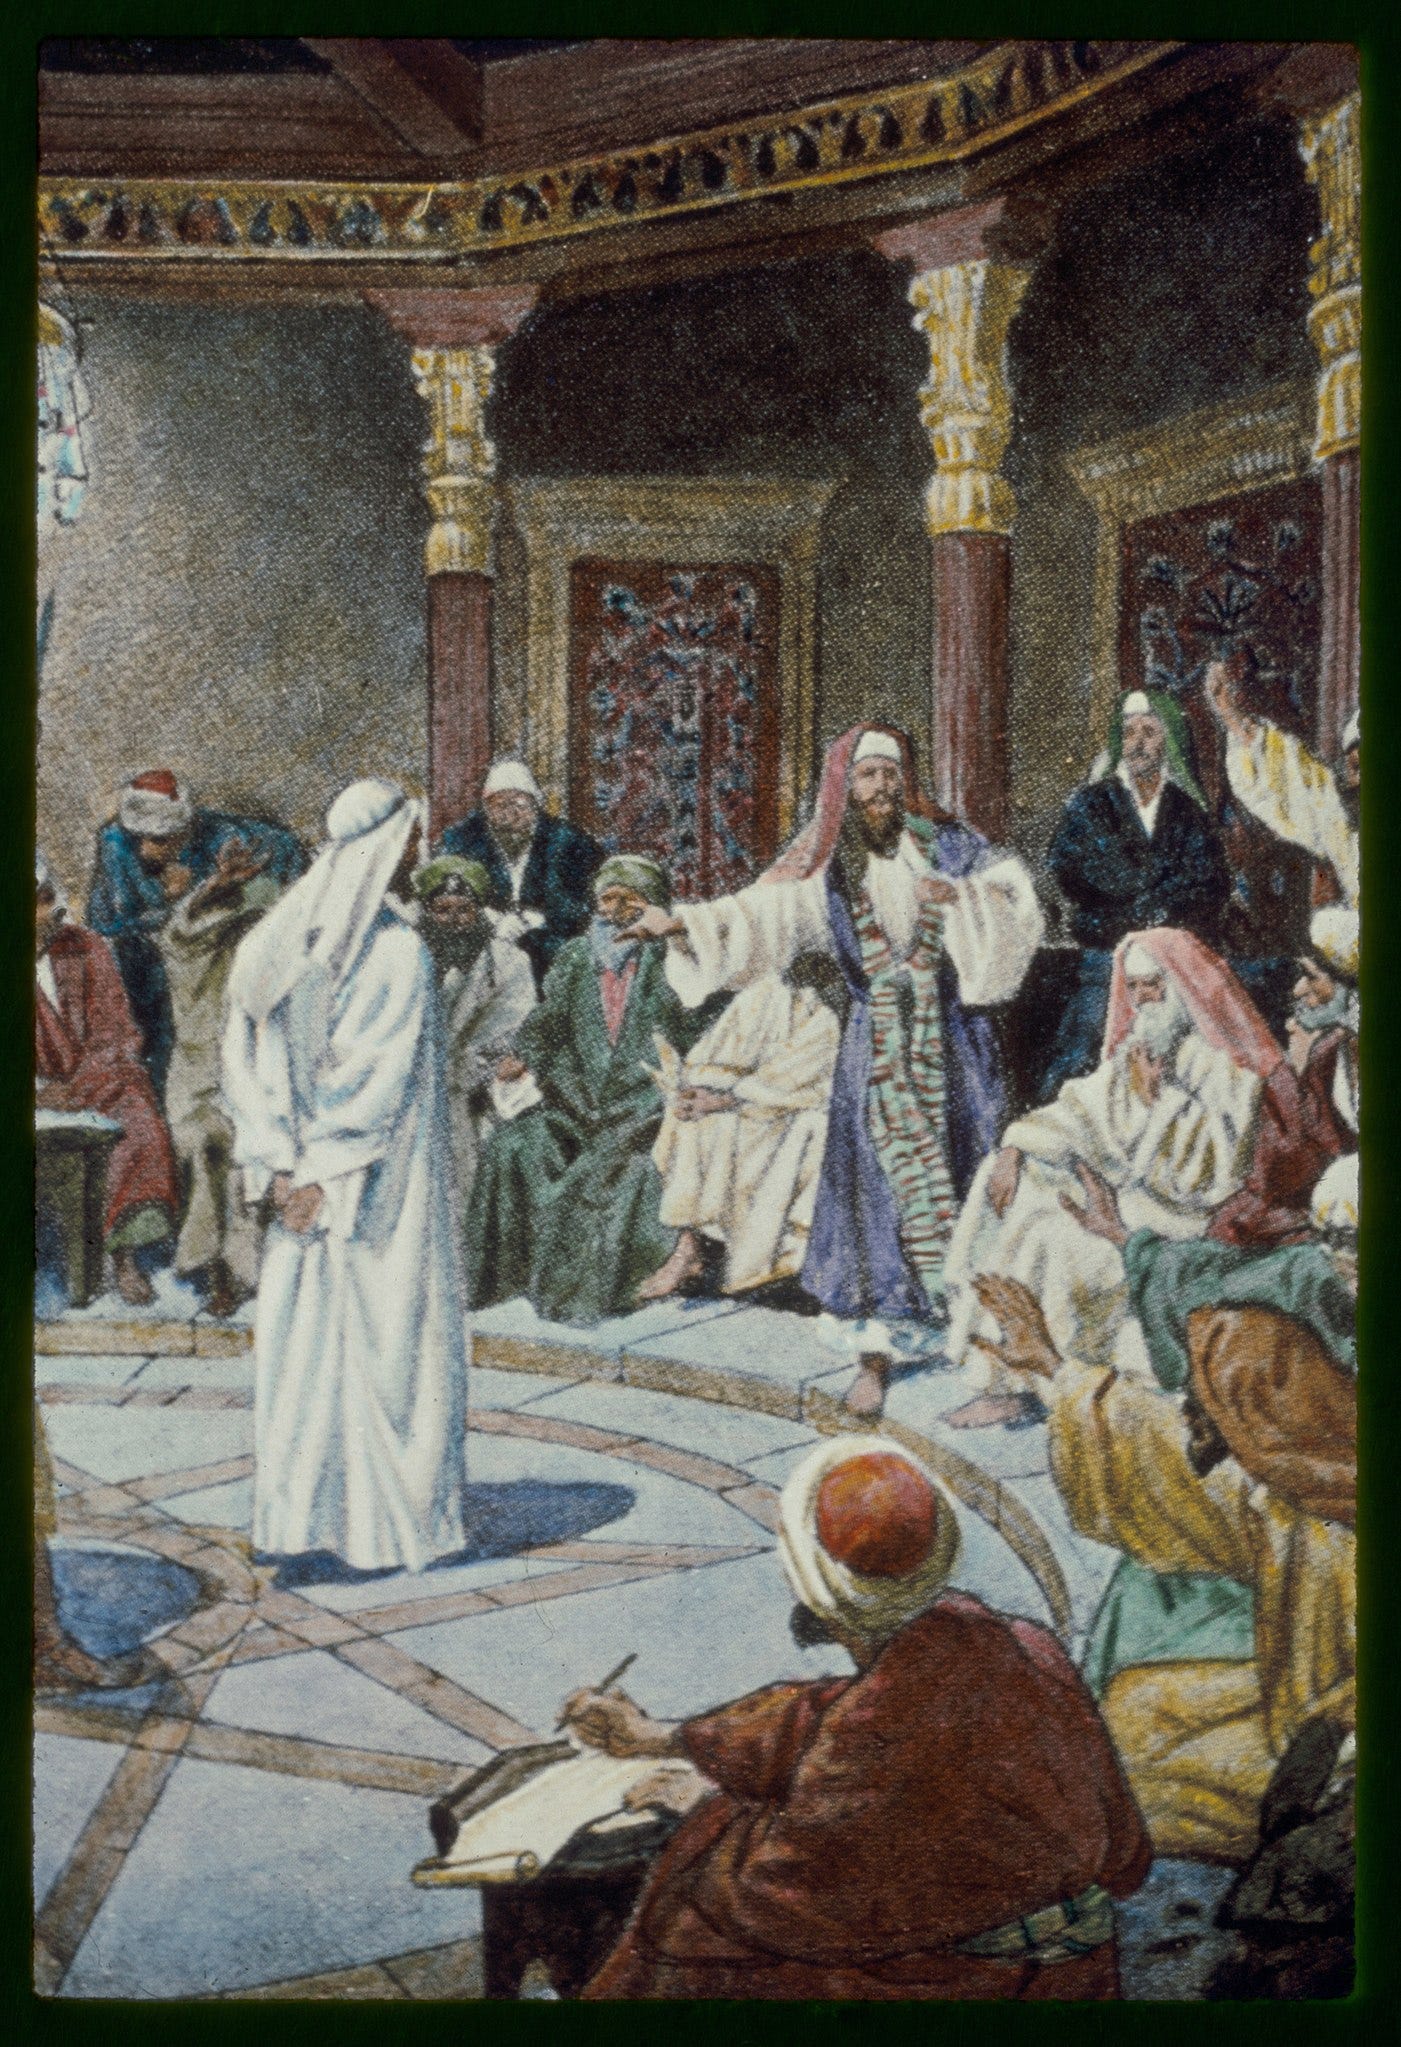 File:Matt. 24-57-66. Jesus brought before Caiaphas and the council, is  accused of blasphemy and condemned LOC matpc.23140.jpg - Wikimedia Commons